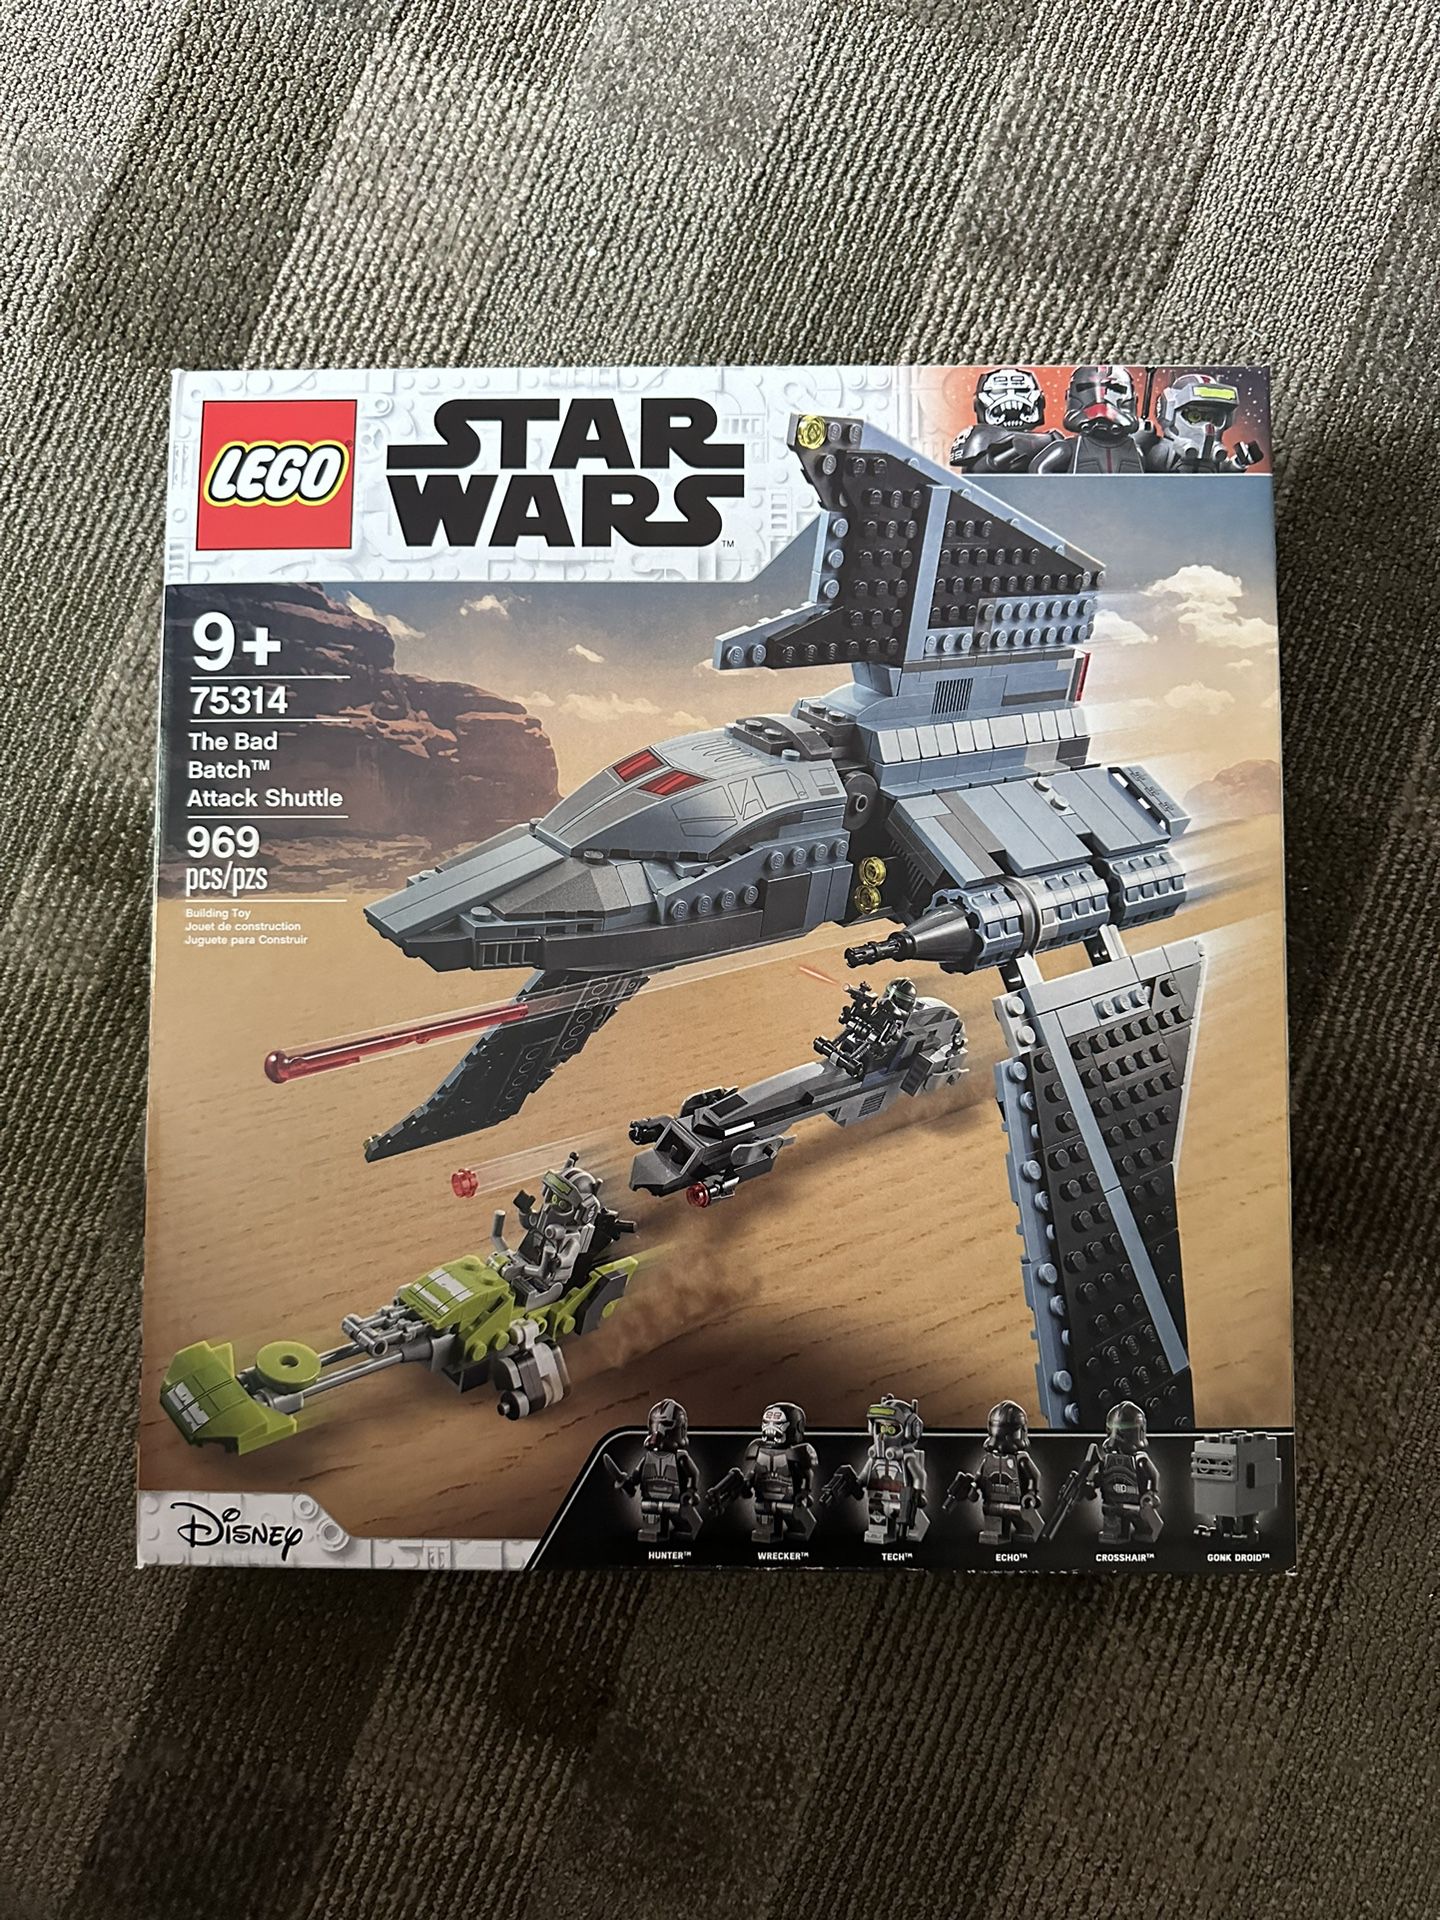 LEGO Star Wars 75314 The Bad Batch Attack Shuttle (BRAND NEW)